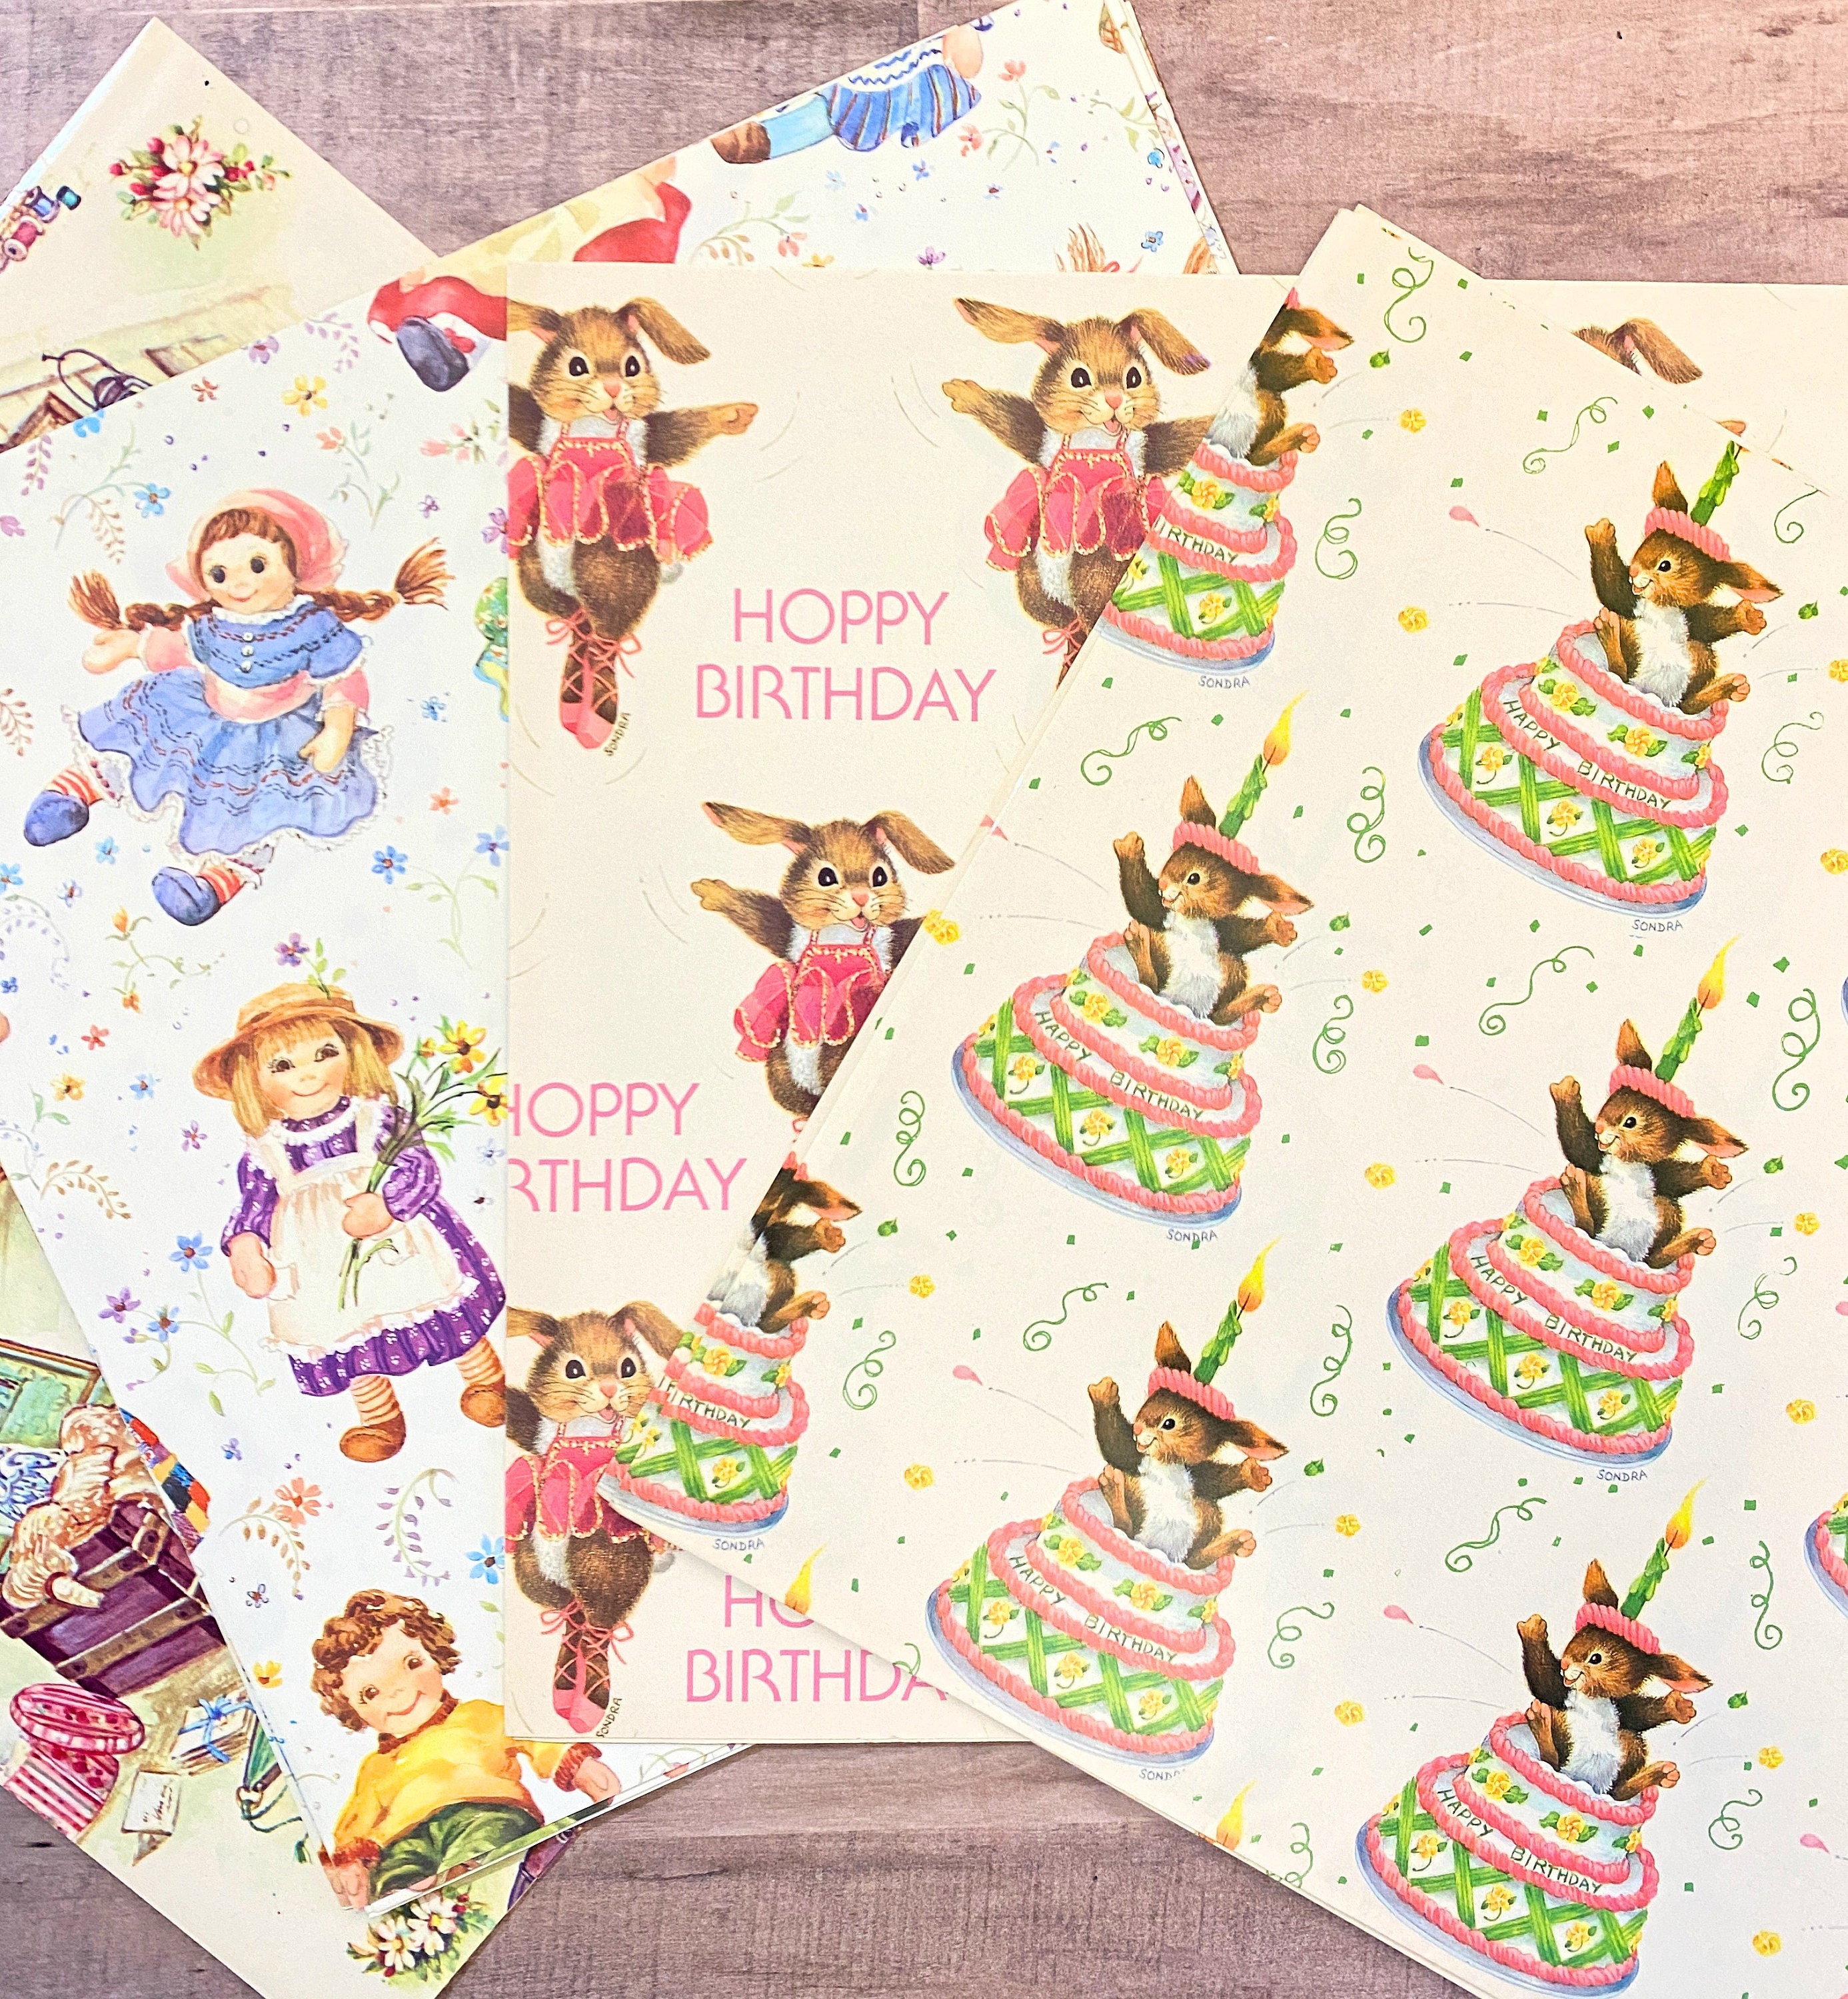 Hallmark Wrapping Paper. Bridal Shower Gift Wrap. Vintage Wrapping Paper. 